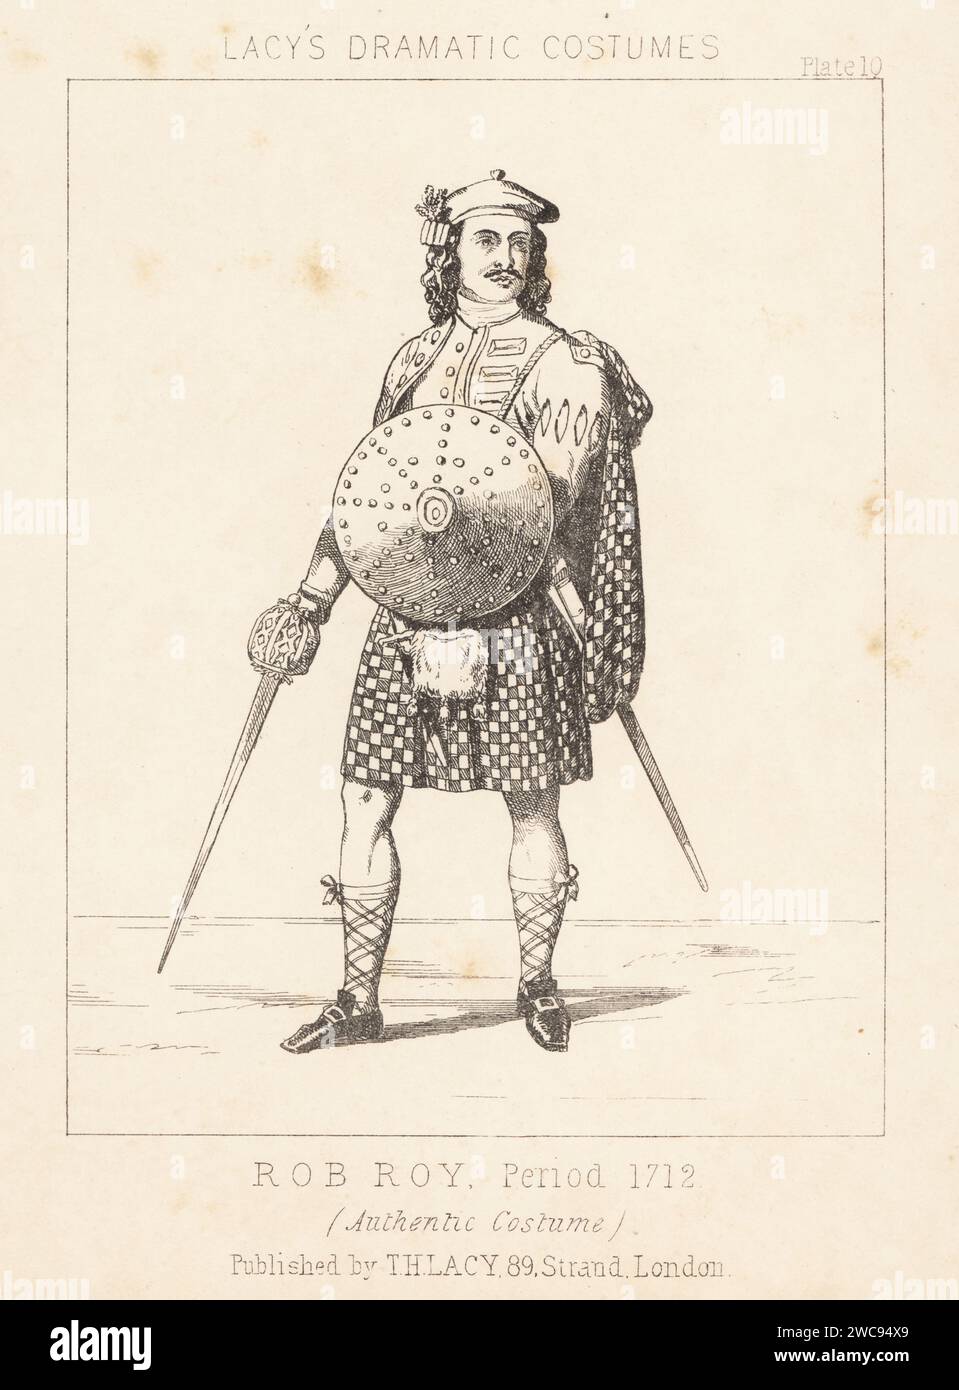 Robert Roy MacGregor, Scottish outlaw and folk hero, 1671-1734. In tam'o shanter, coat, tartan kilt, sporran, buckle shoes, with claymore and targe. Rob Roy, period 1712. Authentic costume. Lithograph from Thomas Hailes Lacy's Male Costumes, Historical, National and Dramatic in 200 Plates, London, 1865. Lacy (1809-1873) was a British actor, playwright, theatrical manager and publisher. Stock Photo